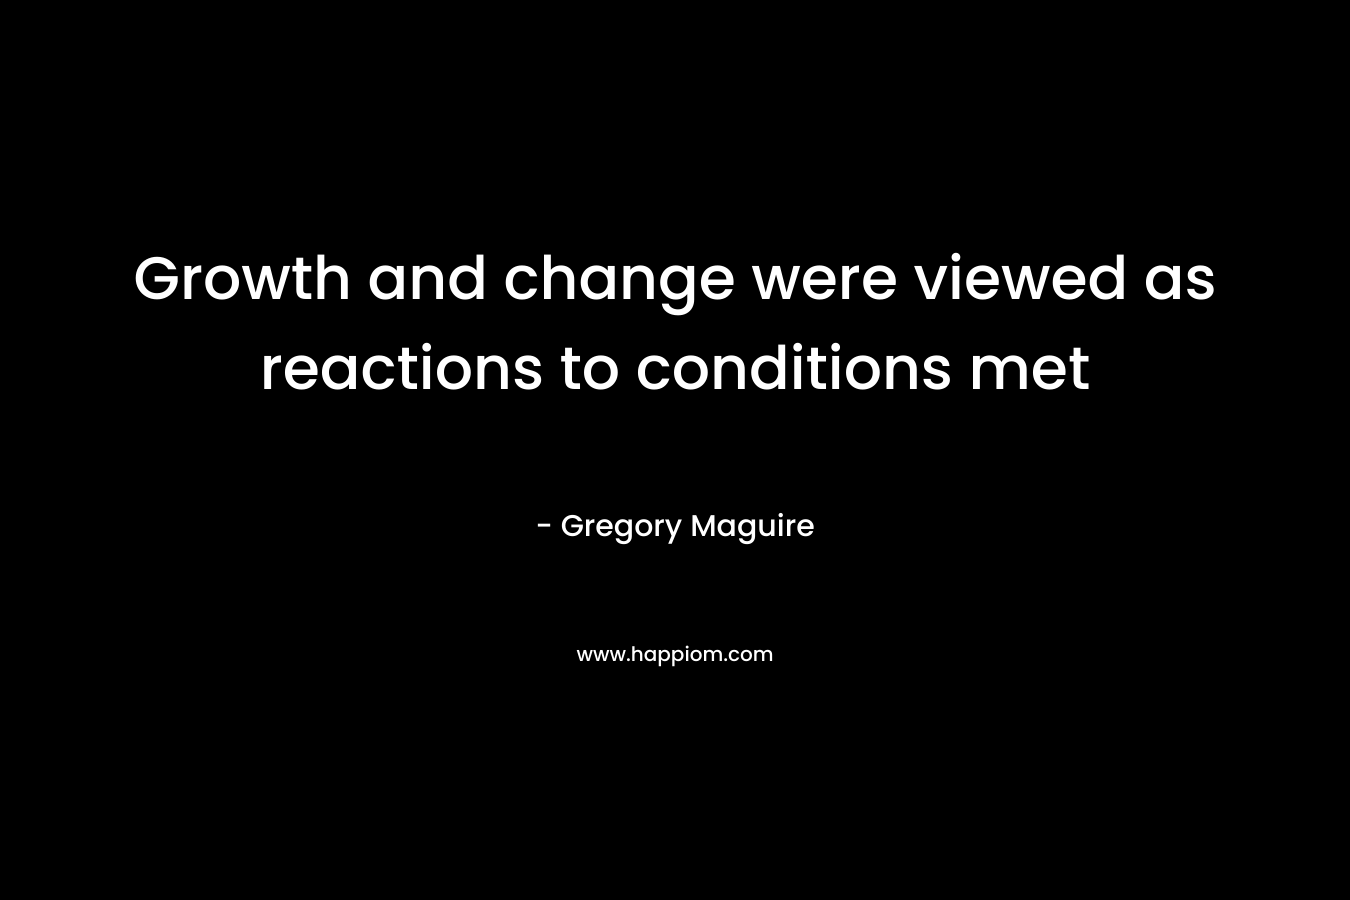 Growth and change were viewed as reactions to conditions met